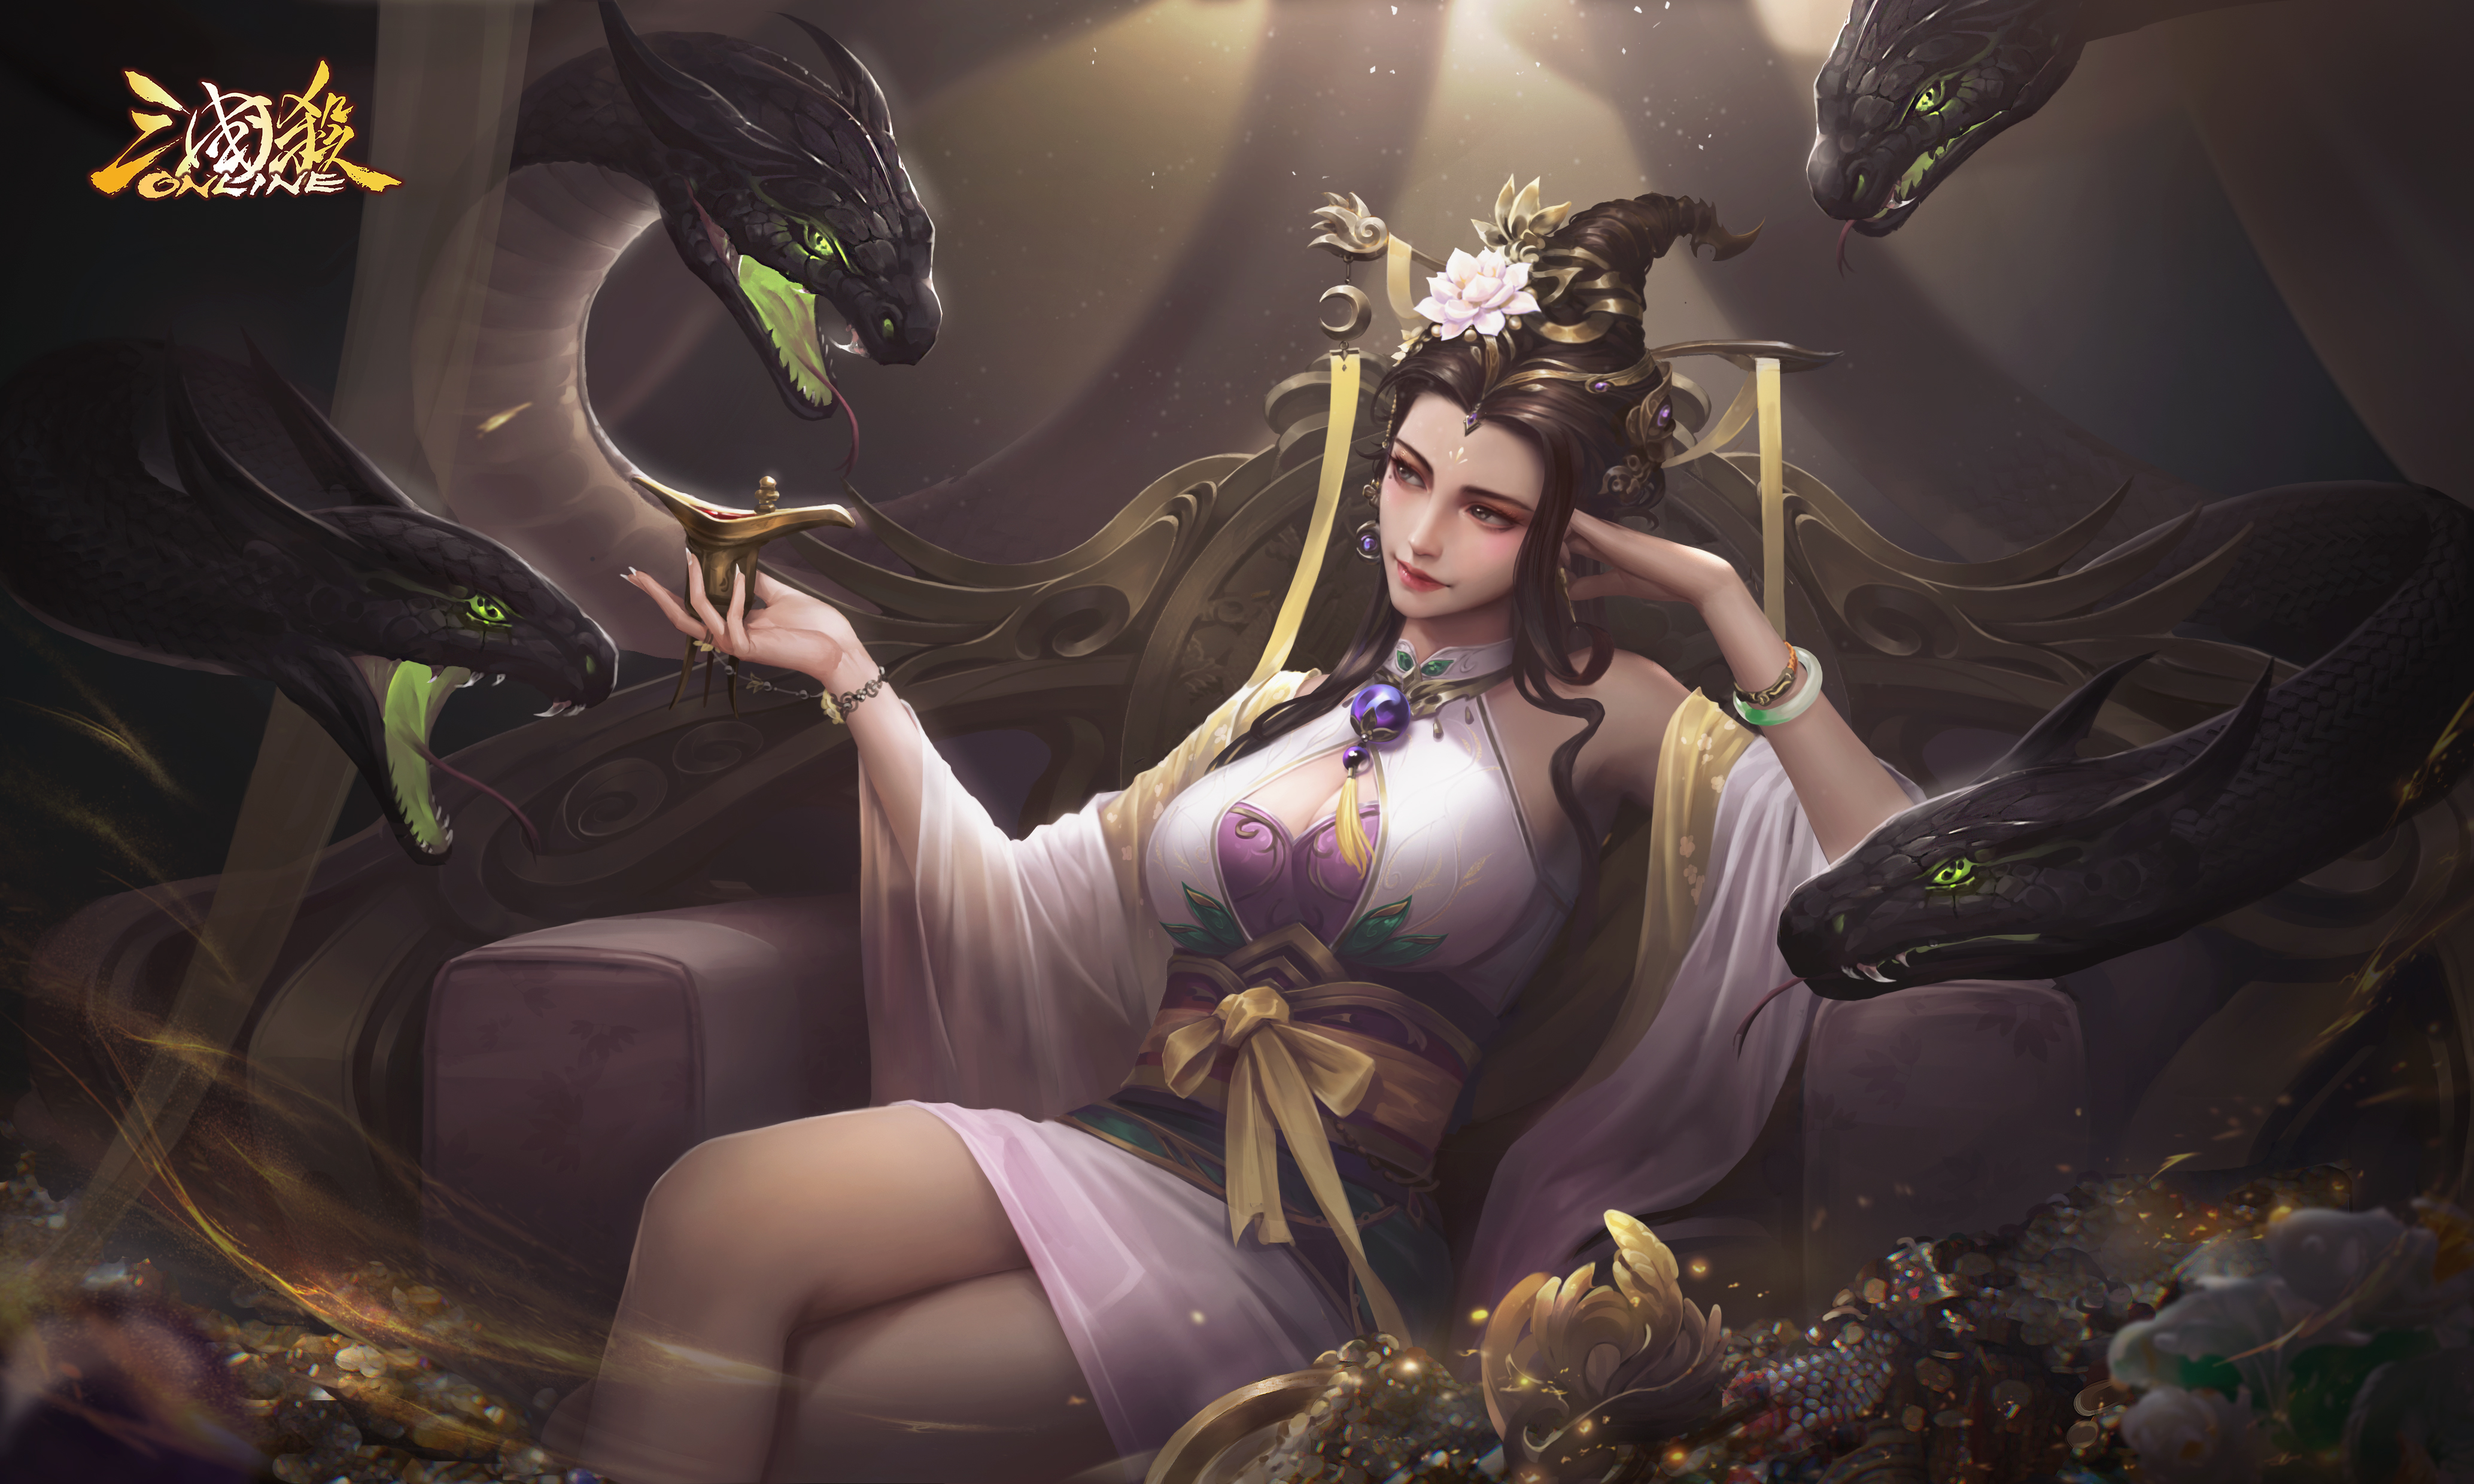 Video Game Characters Three Kingdoms Video Games Video Game Art Video Game Girls Creature Flower In  4134x2480